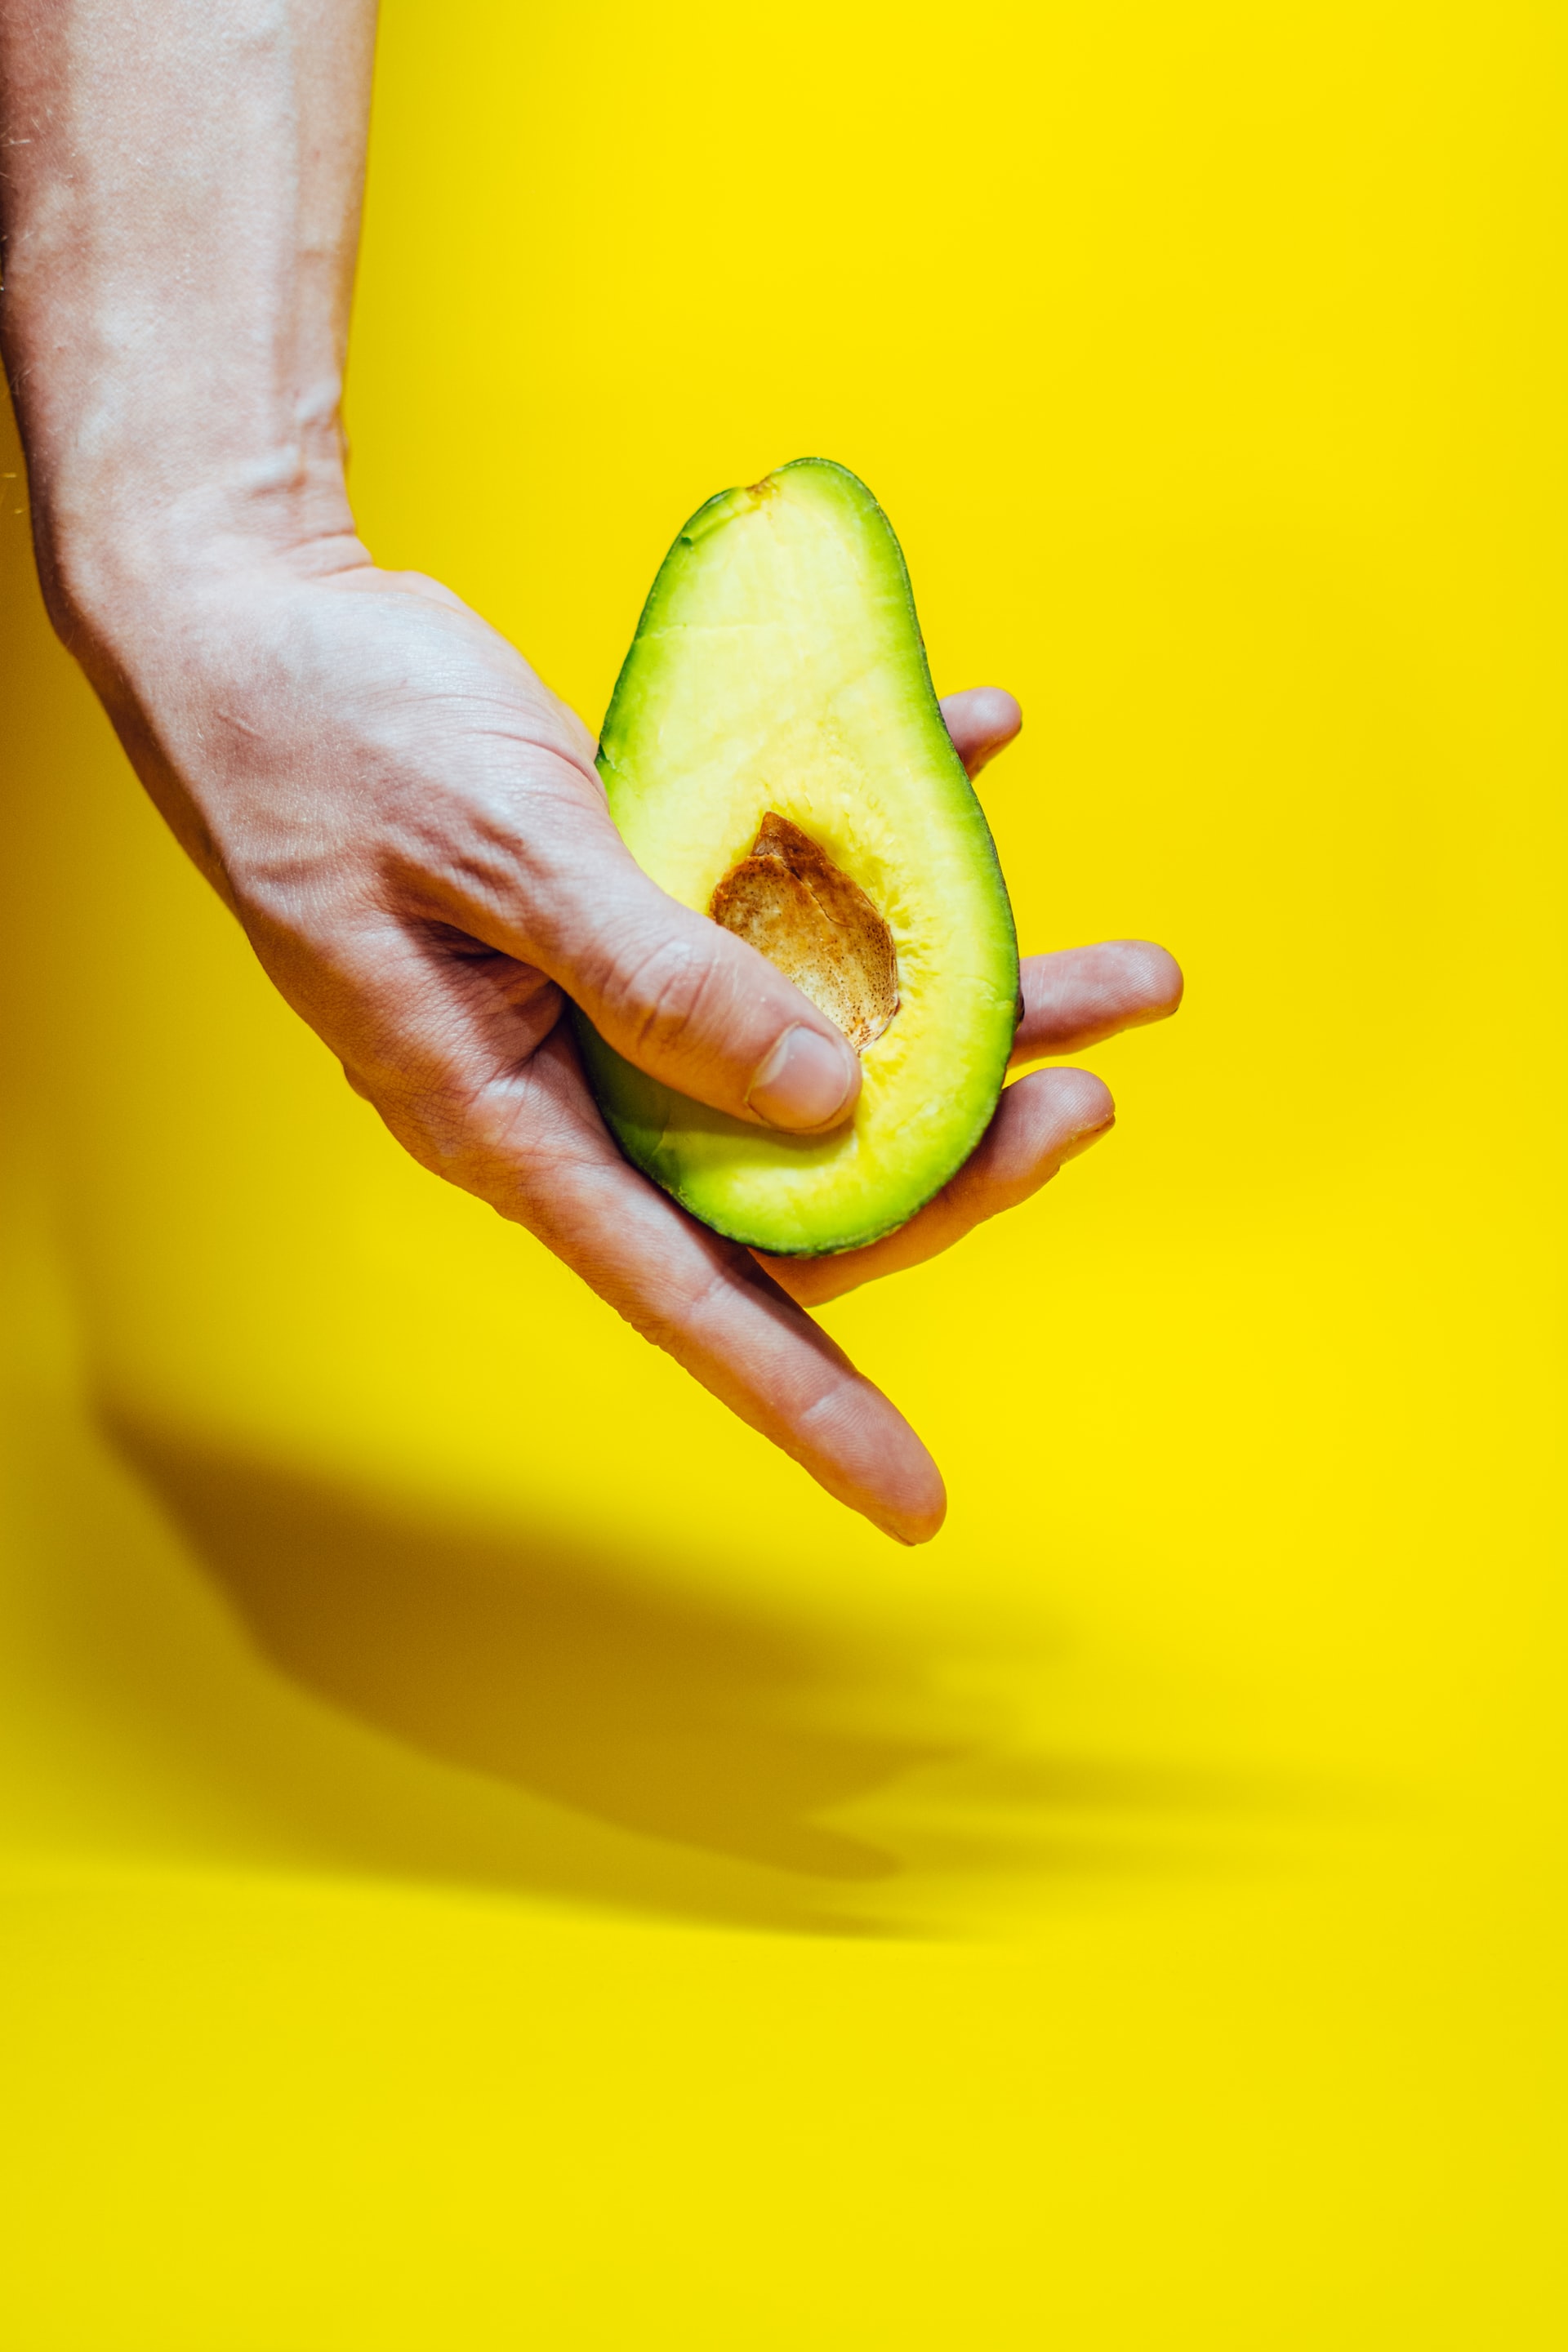 Hands holding an avocado representing sexuality